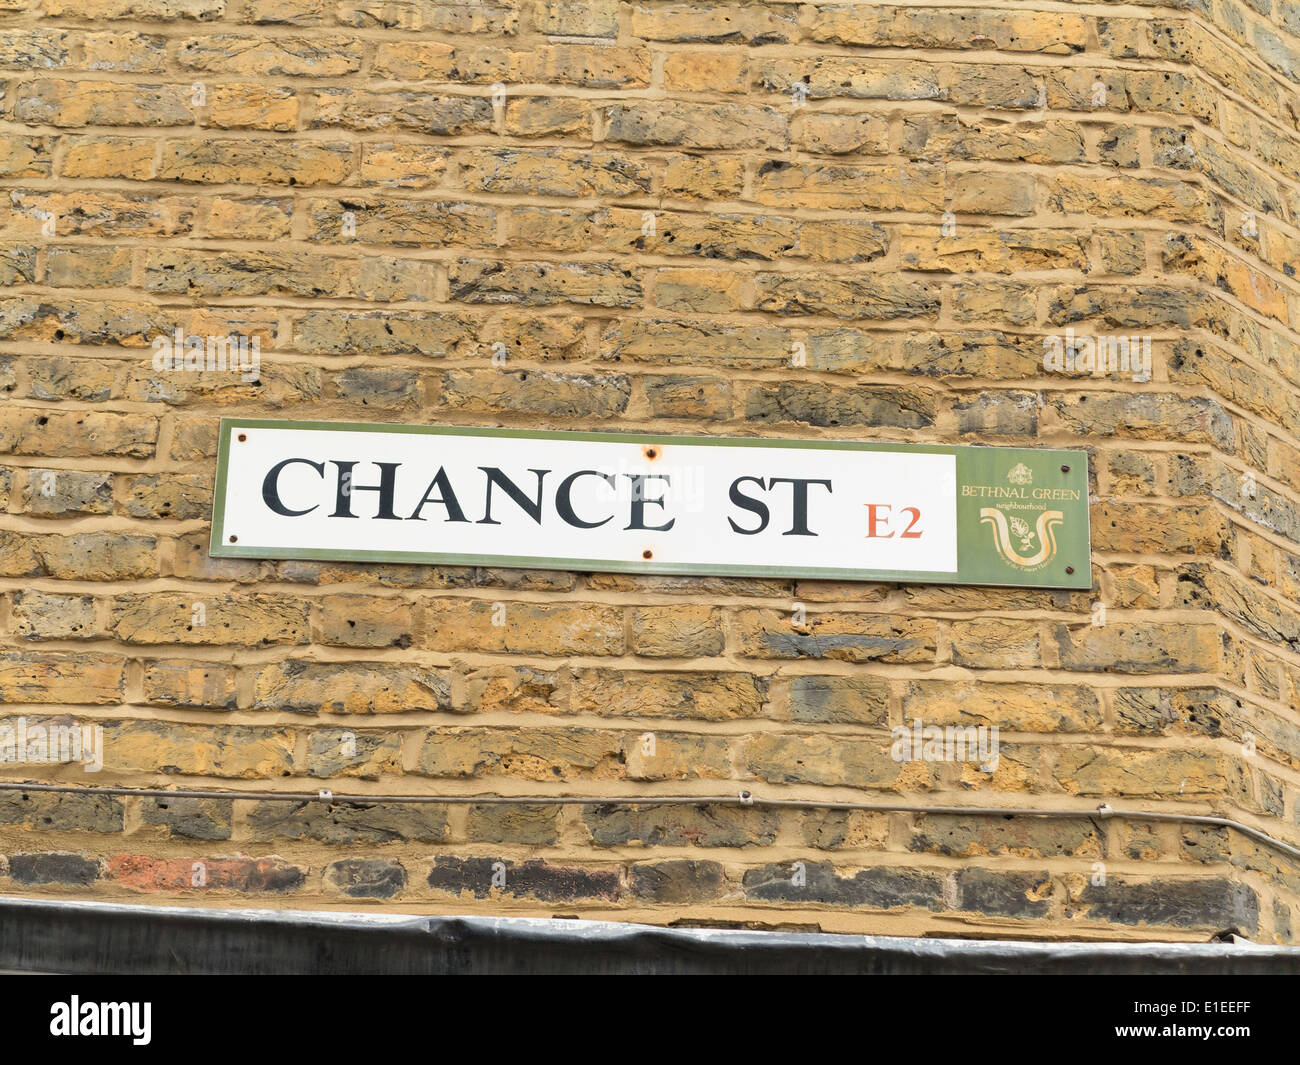 Chance Street street sign, Londres, Angleterre Banque D'Images